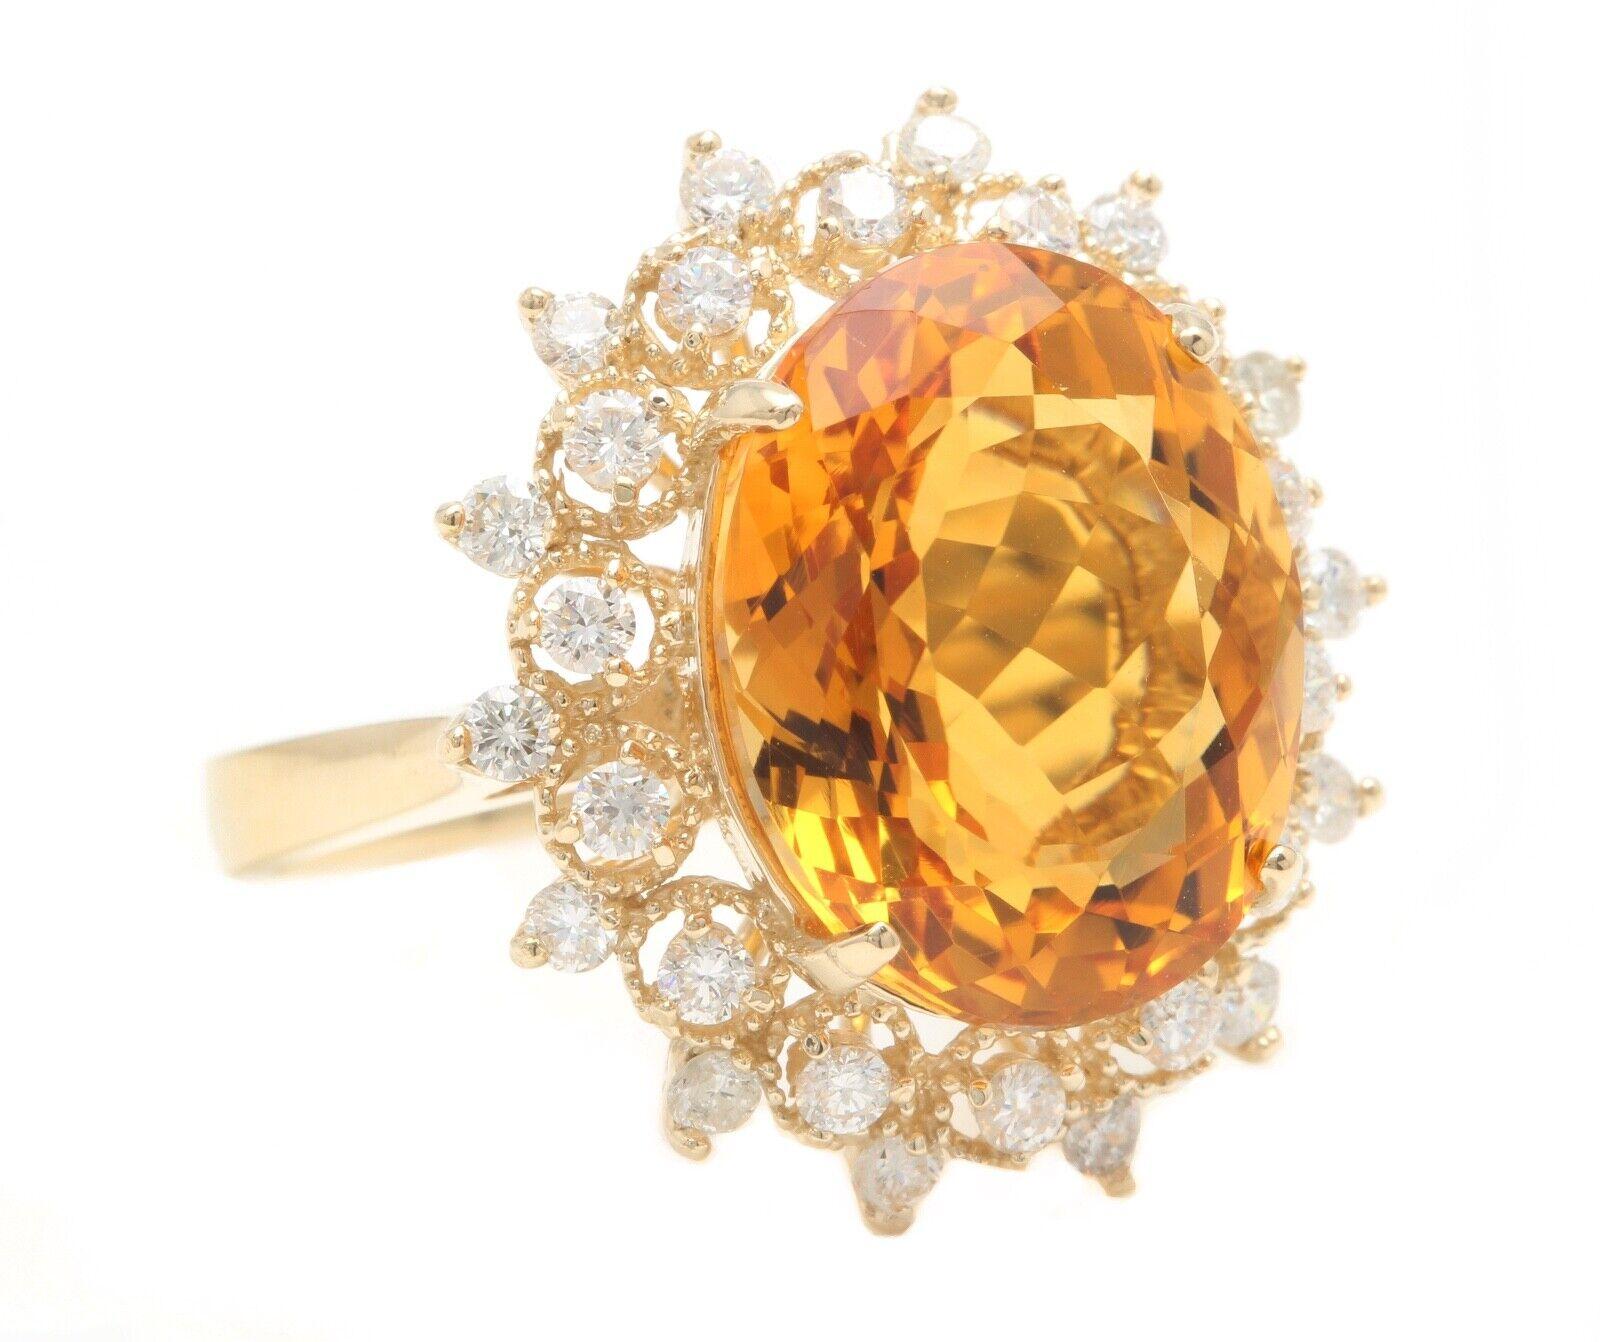 9.75 Carats Exquisite Natural Citrine and Diamond 14K Solid Yellow Gold Ring

Suggested Replacement Value: $5,500.00

Total Natural Oval Citrine Weights: Approx. 9.00 Carats 

Citrine Measures: 15 x 12mm

Natural Round Diamonds Weight: Approx. 0.75